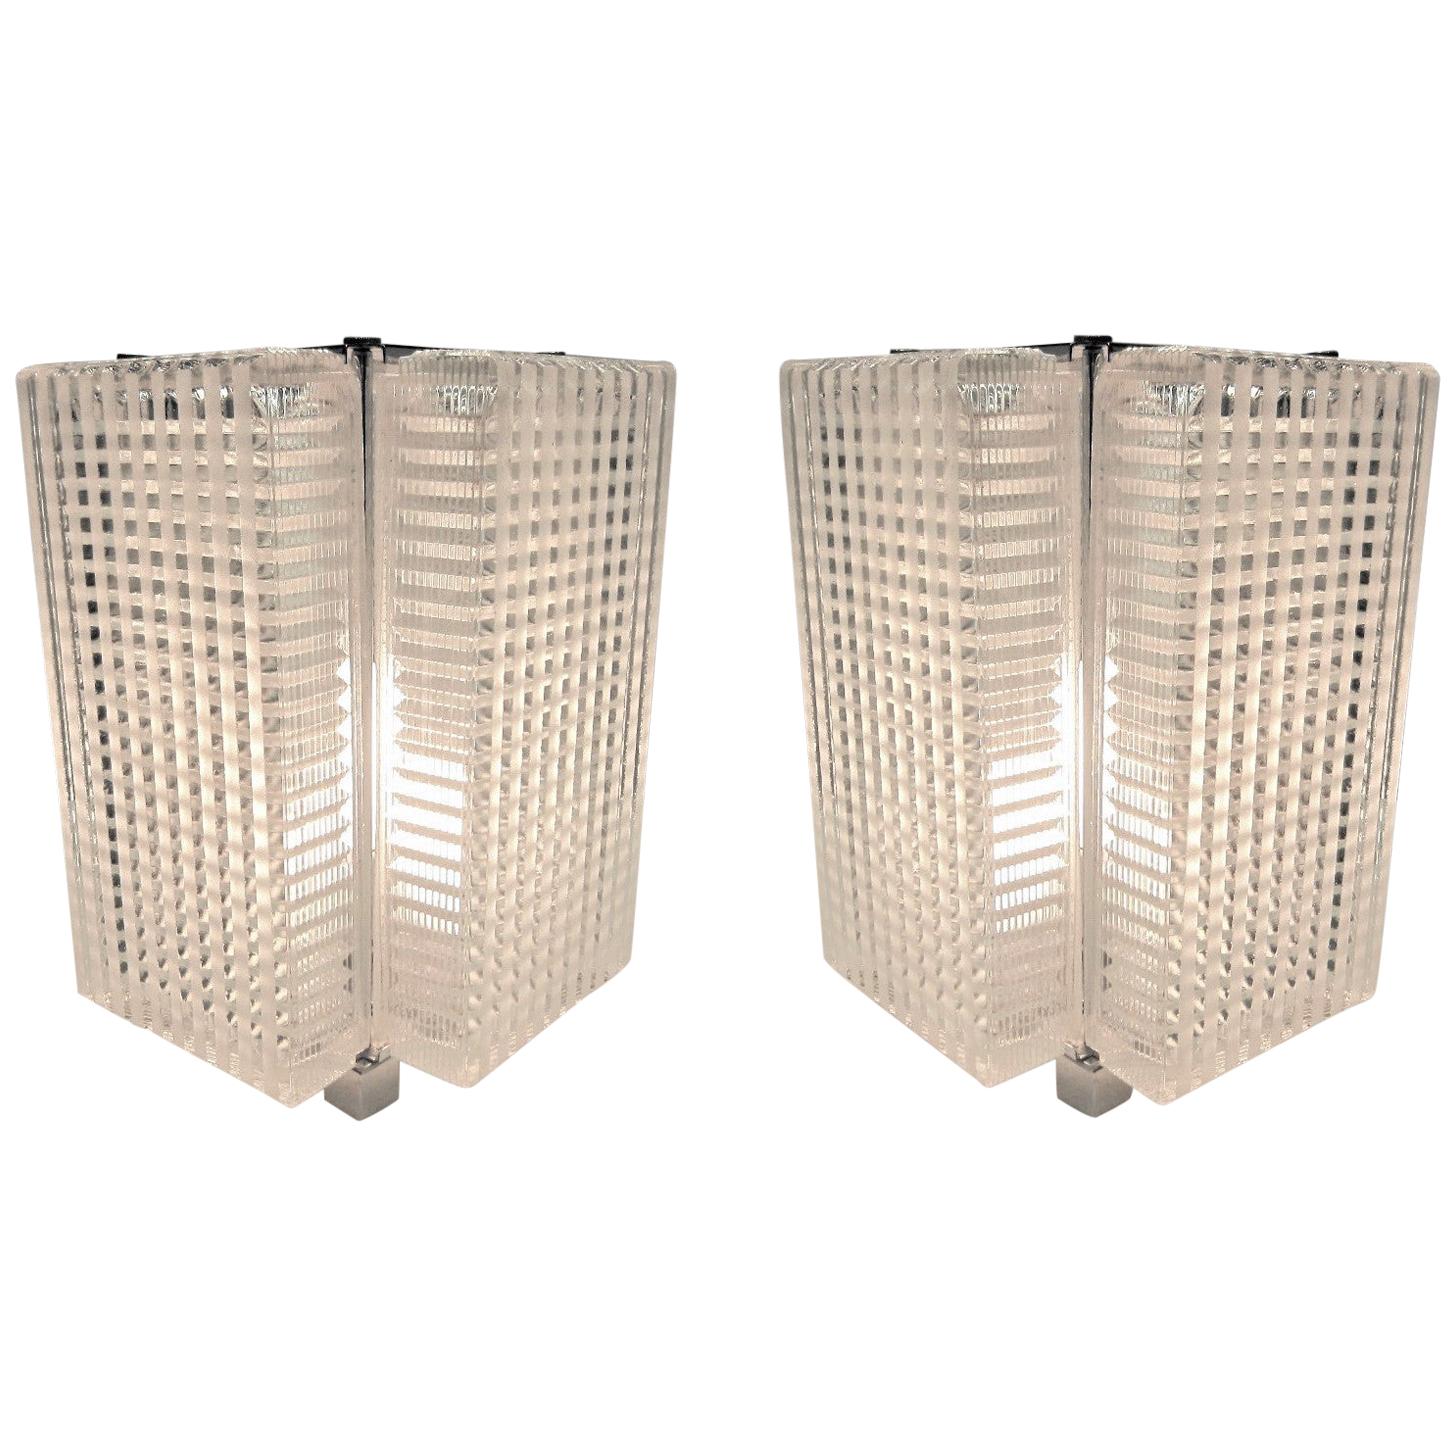  Pair of Midcentury Glass Table Lamps with Polished Nickeled Trim